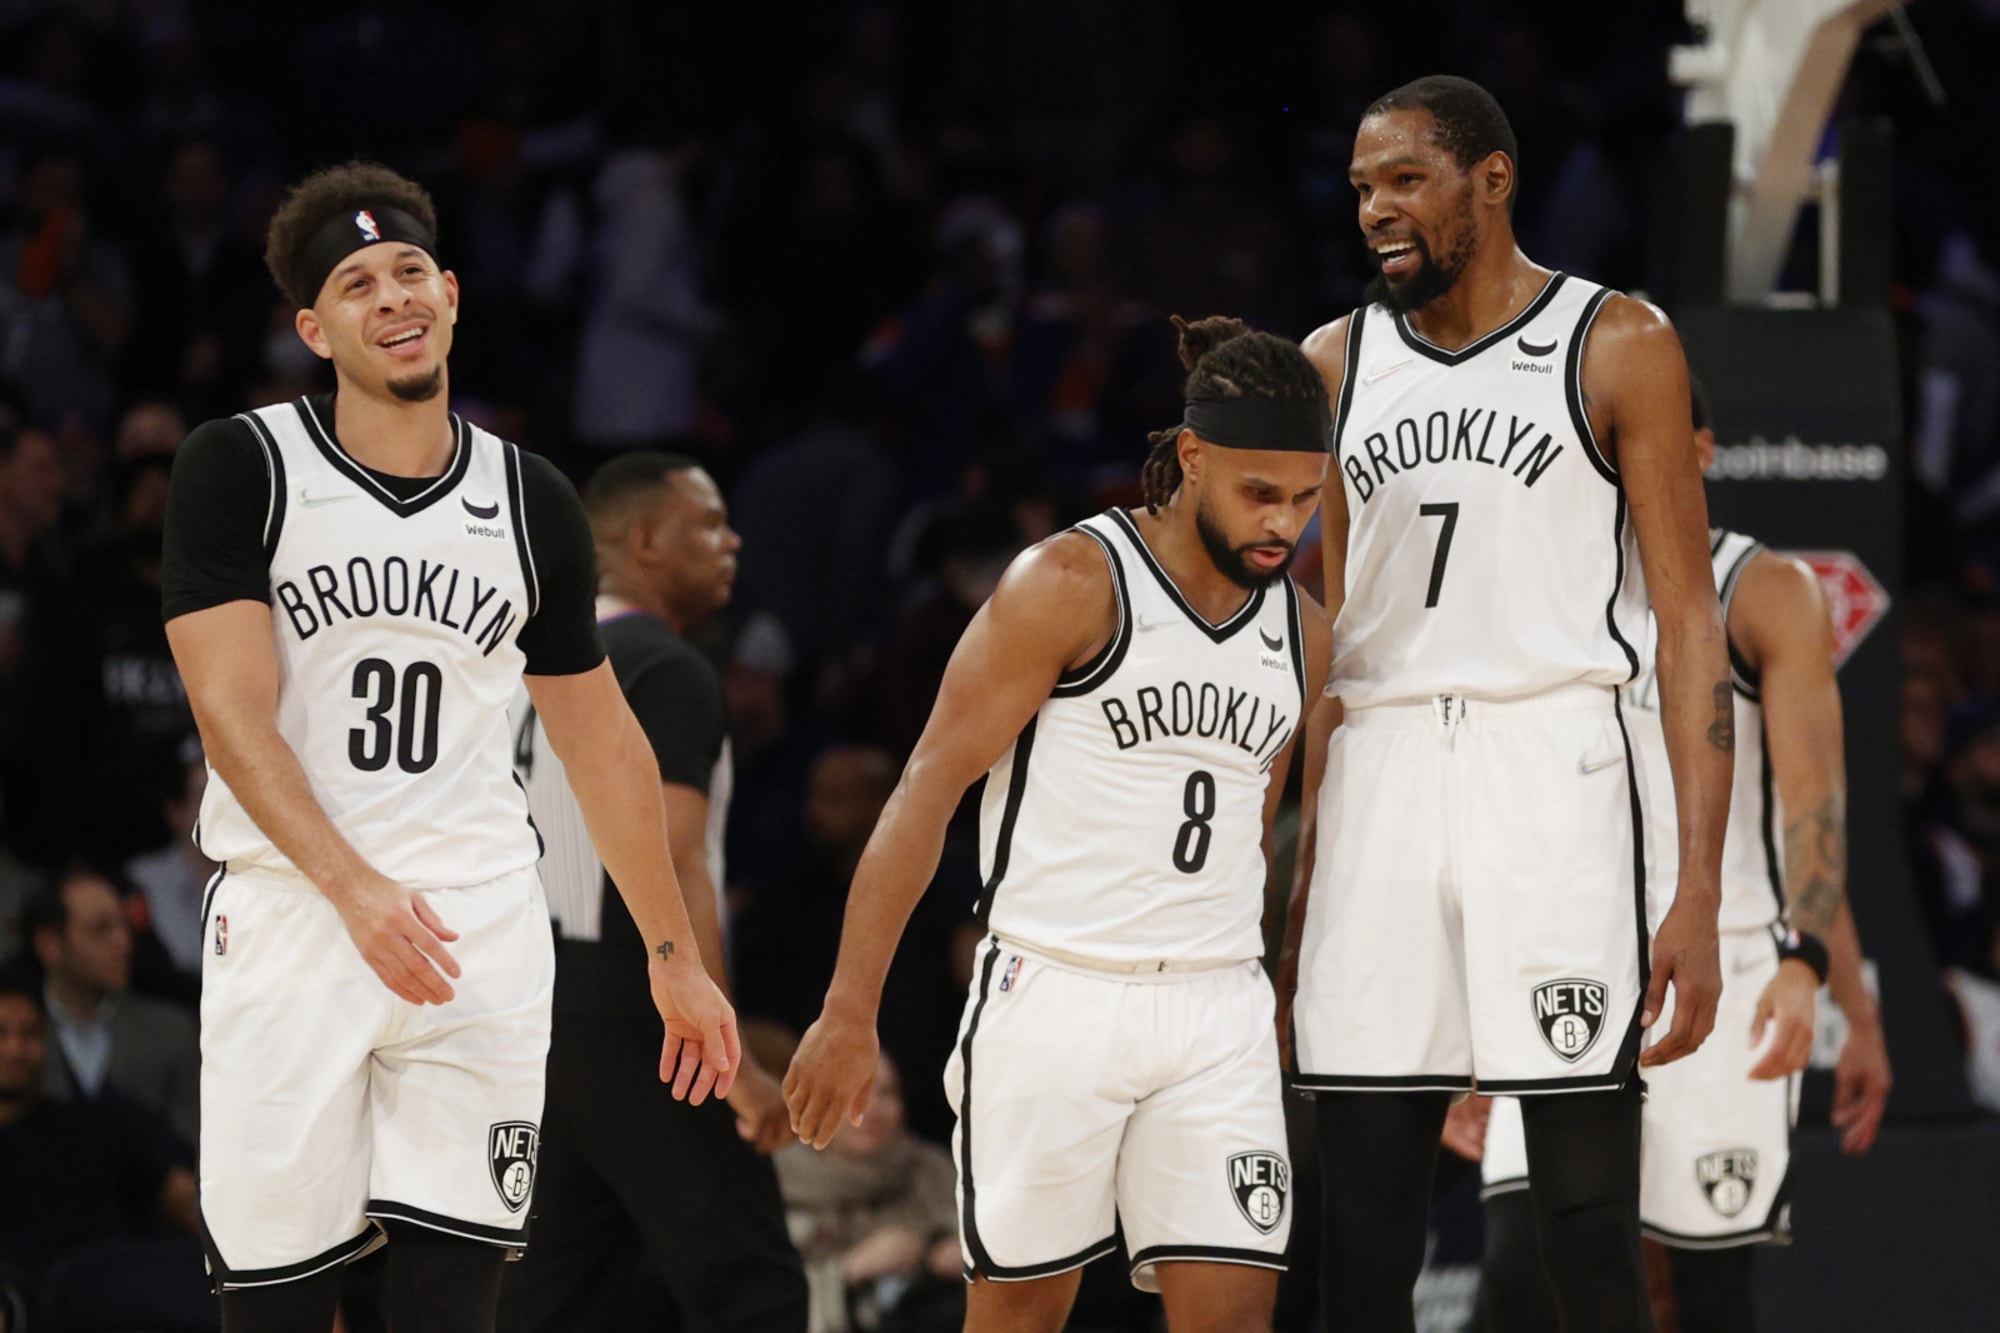 Brooklyn Nets Projected as Historic 3-Point Shooting Team in 2022-23